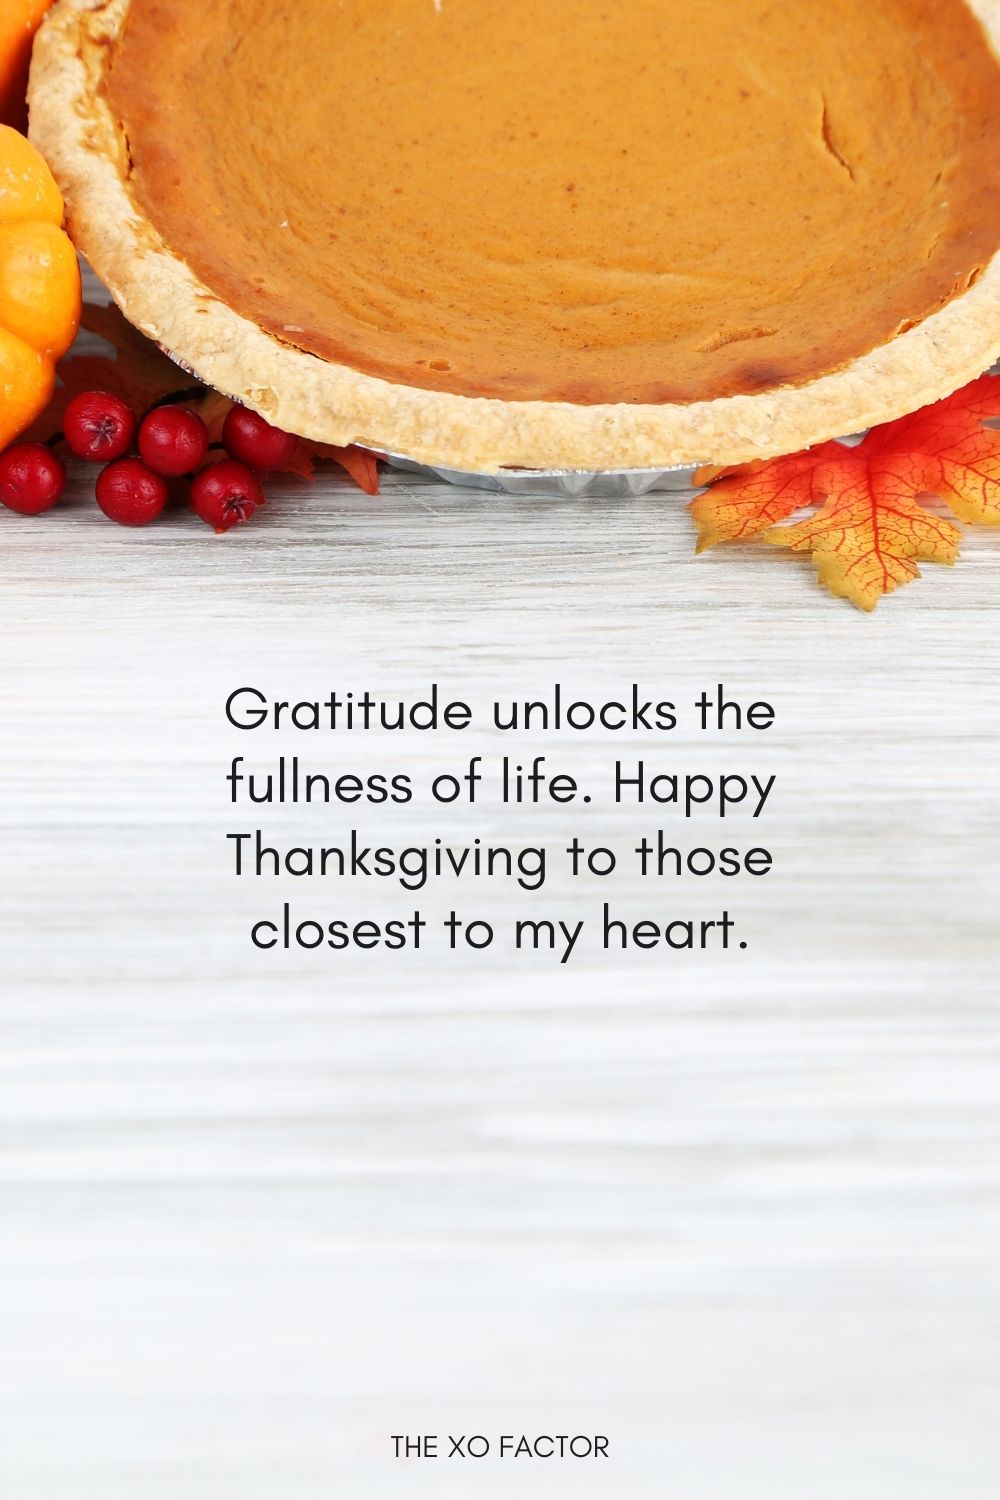 Gratitude unlocks the fullness of life. Happy Thanksgiving to those closest to my heart.